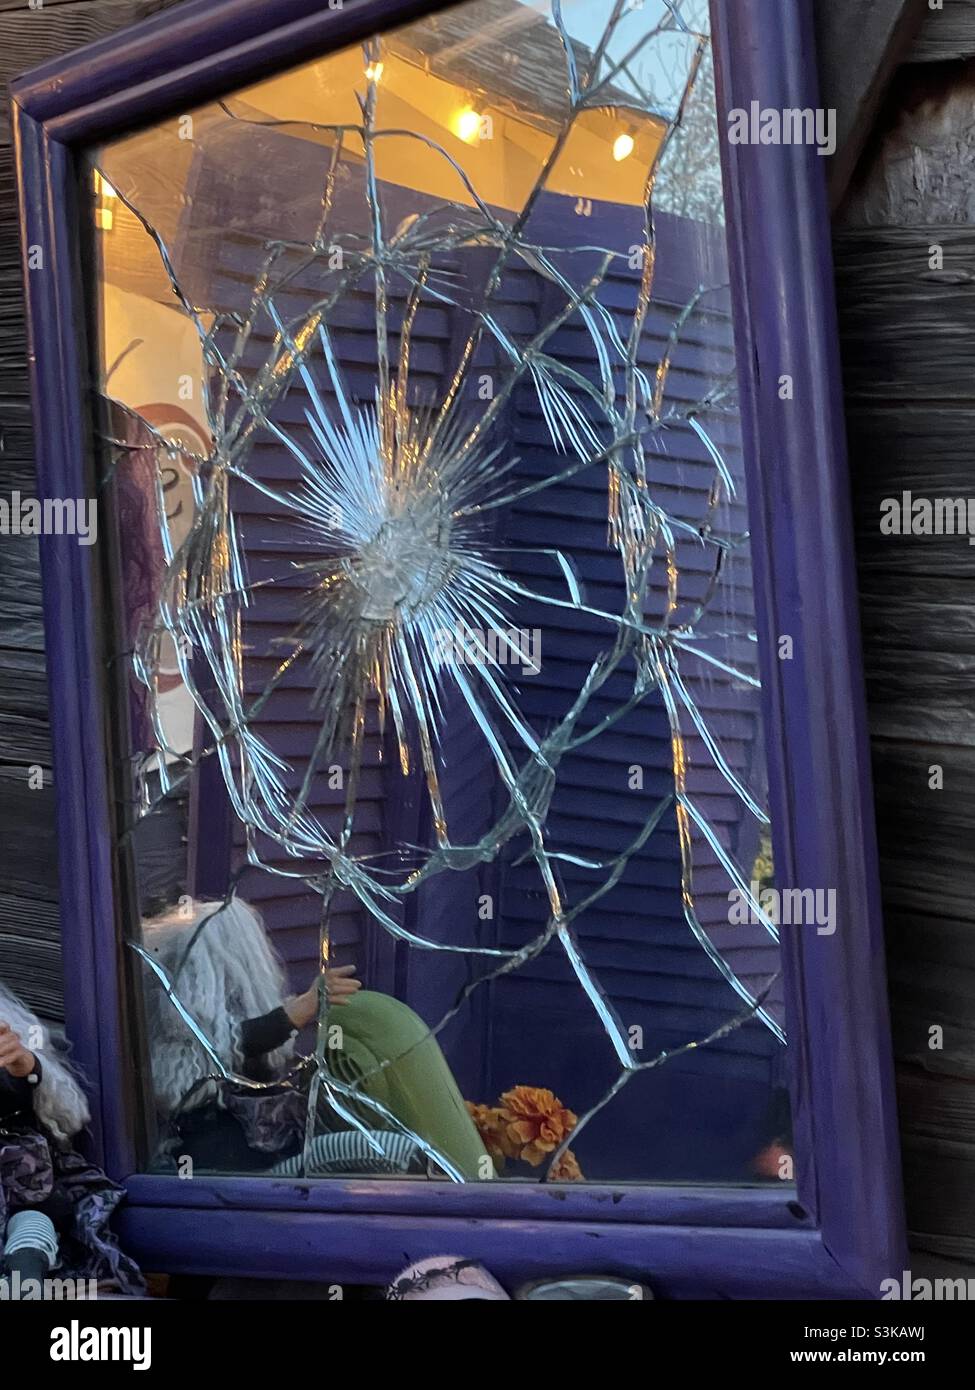 A broken mirror is part of the decor at Gardner Village’s annual “WitchFest” each October. Stock Photo